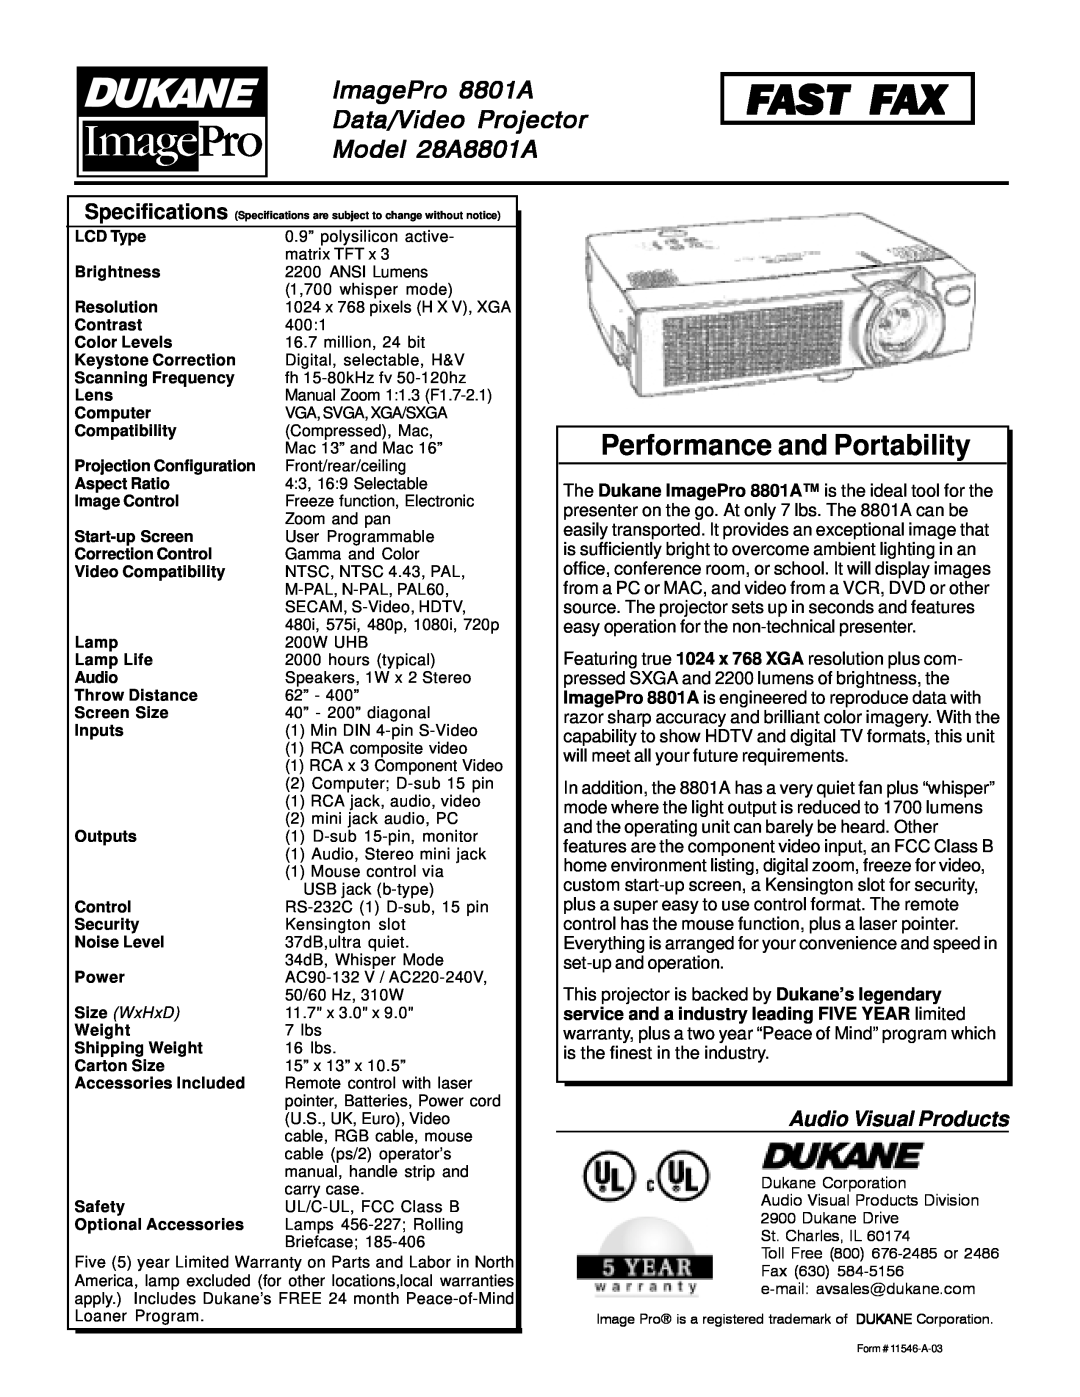 Dukane Fast Fax, Performance and Portability, ImagePro 8801A Data/Video Projector Model 28A8801A, Audio Visual Products 